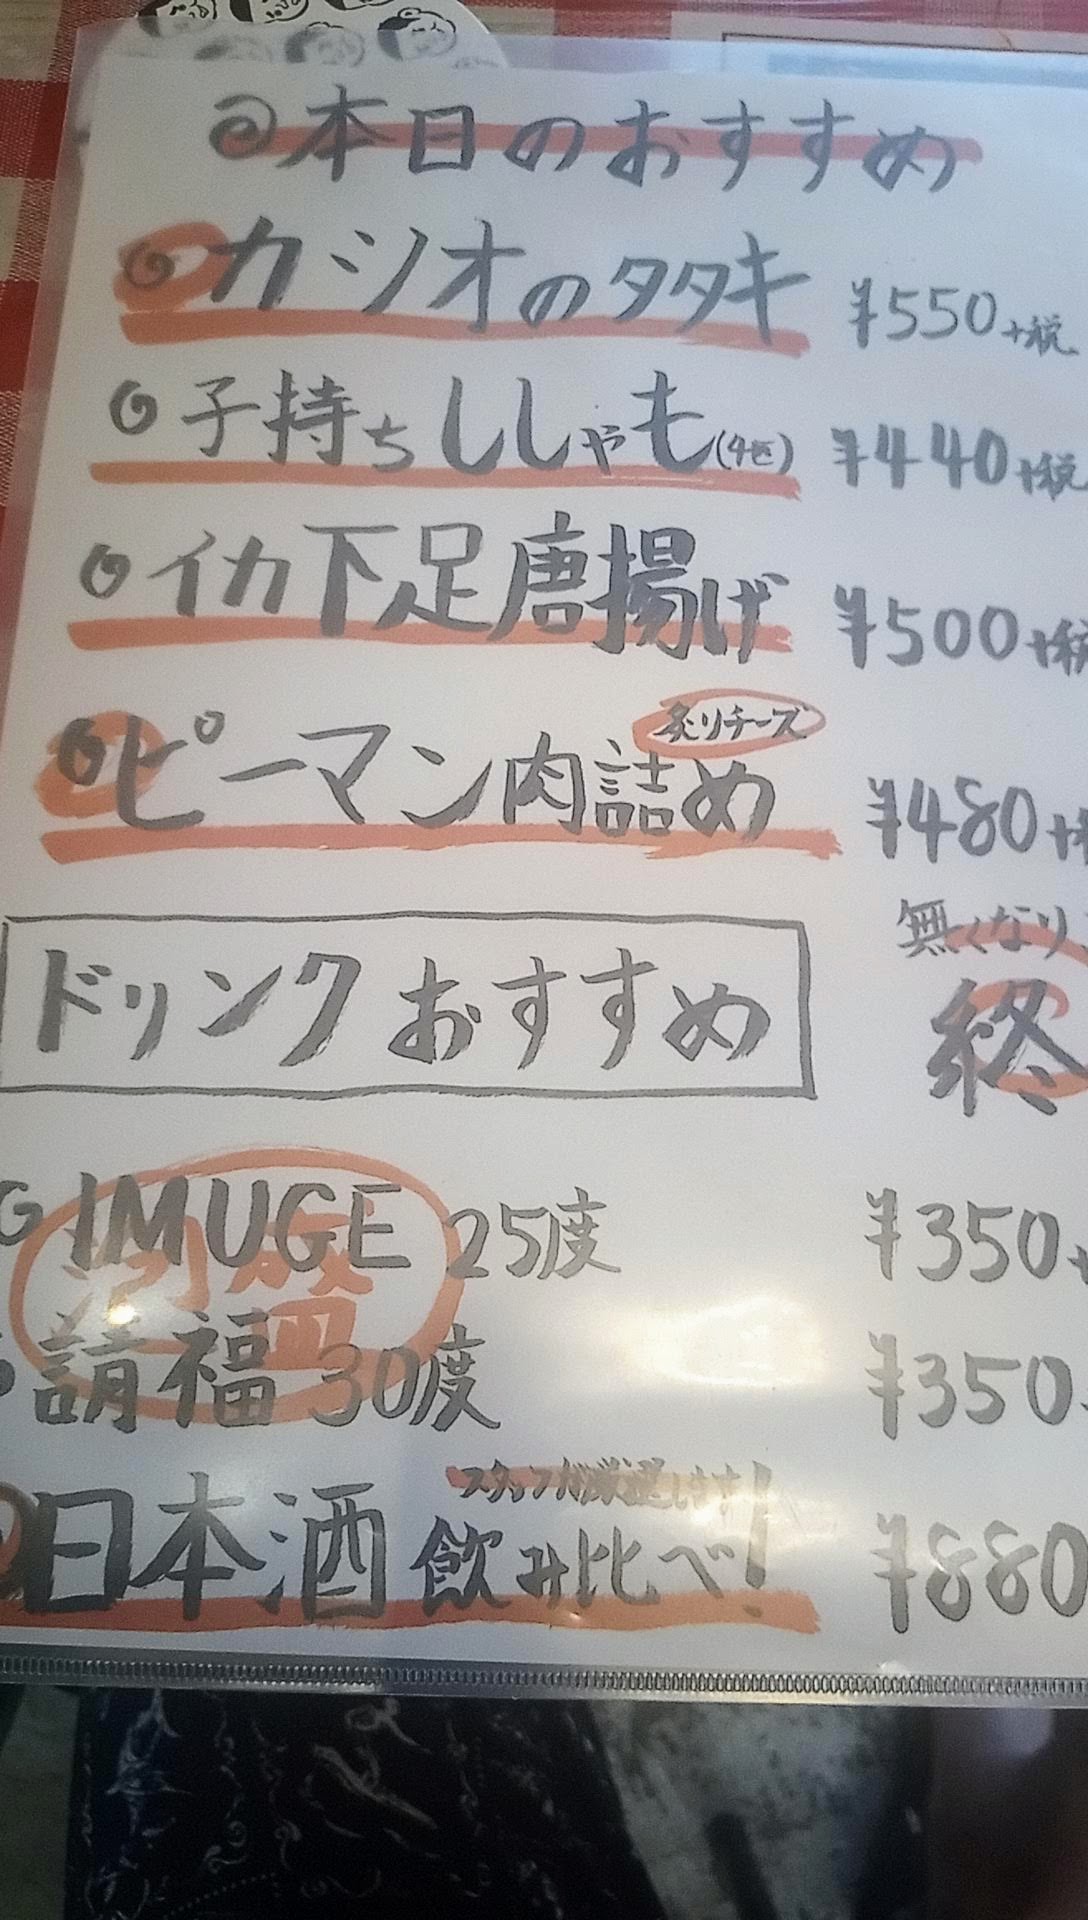 the recommended food and drink menu of Densuke Shouten